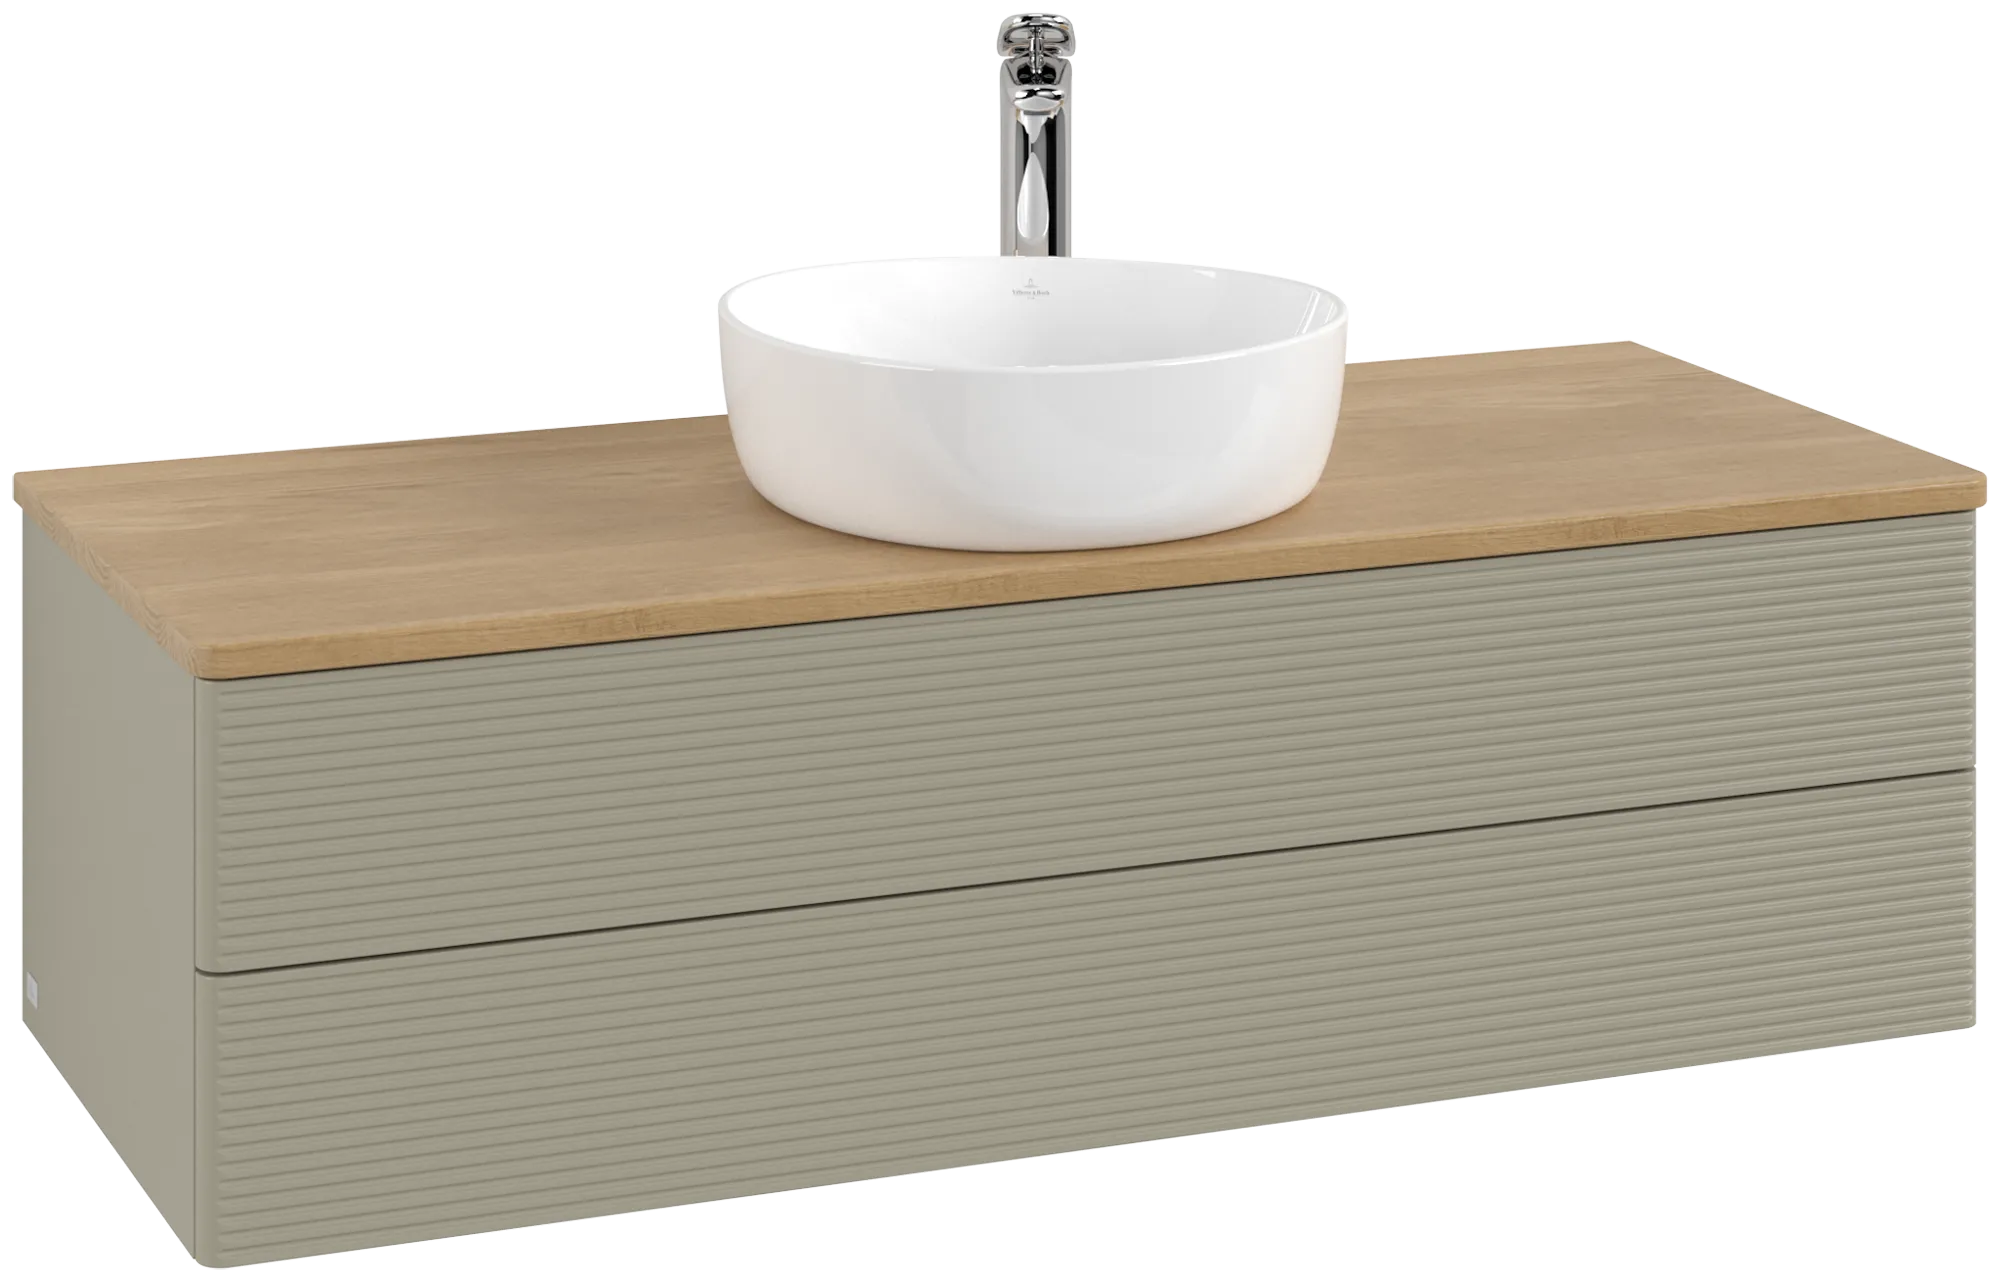 Picture of VILLEROY BOCH Antao Vanity unit, 2 pull-out compartments, 1200 x 360 x 500 mm, Front with grain texture, Stone Grey Matt Lacquer / Honey Oak #K21151HK